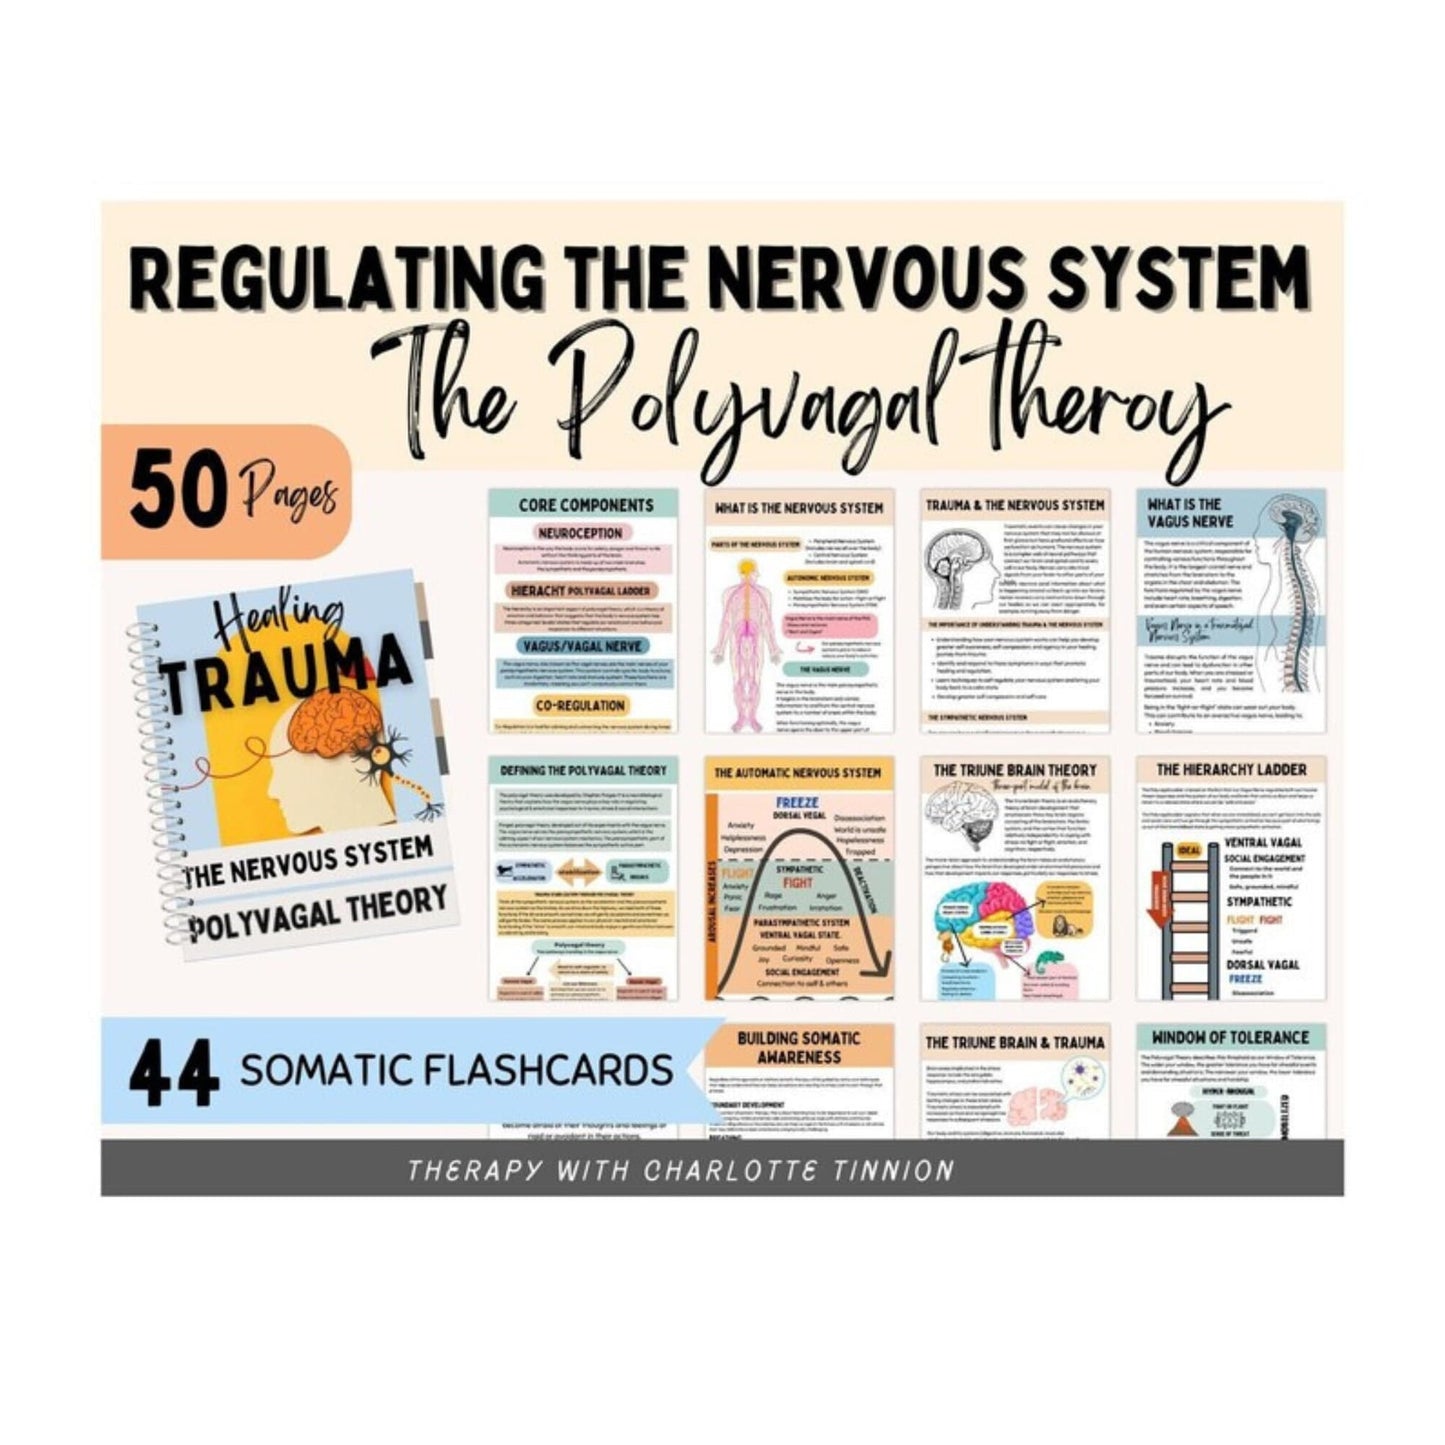 Polyvagal Theory & Nervous System Regulation: Trauma Therapy.